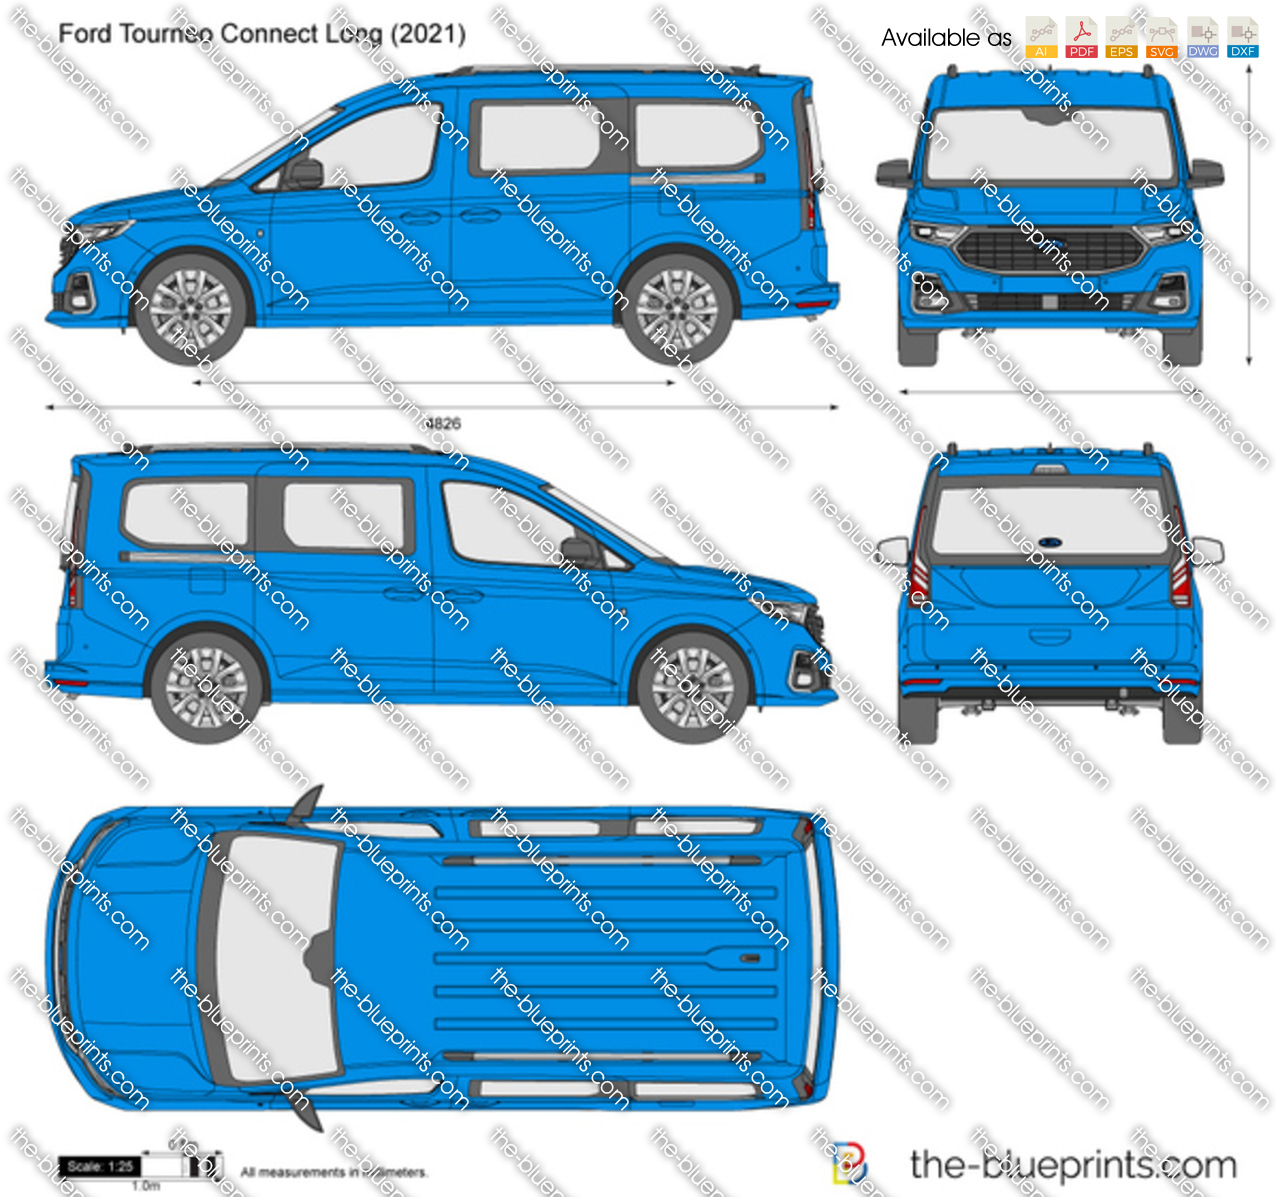 Ford Tourneo Connect Long